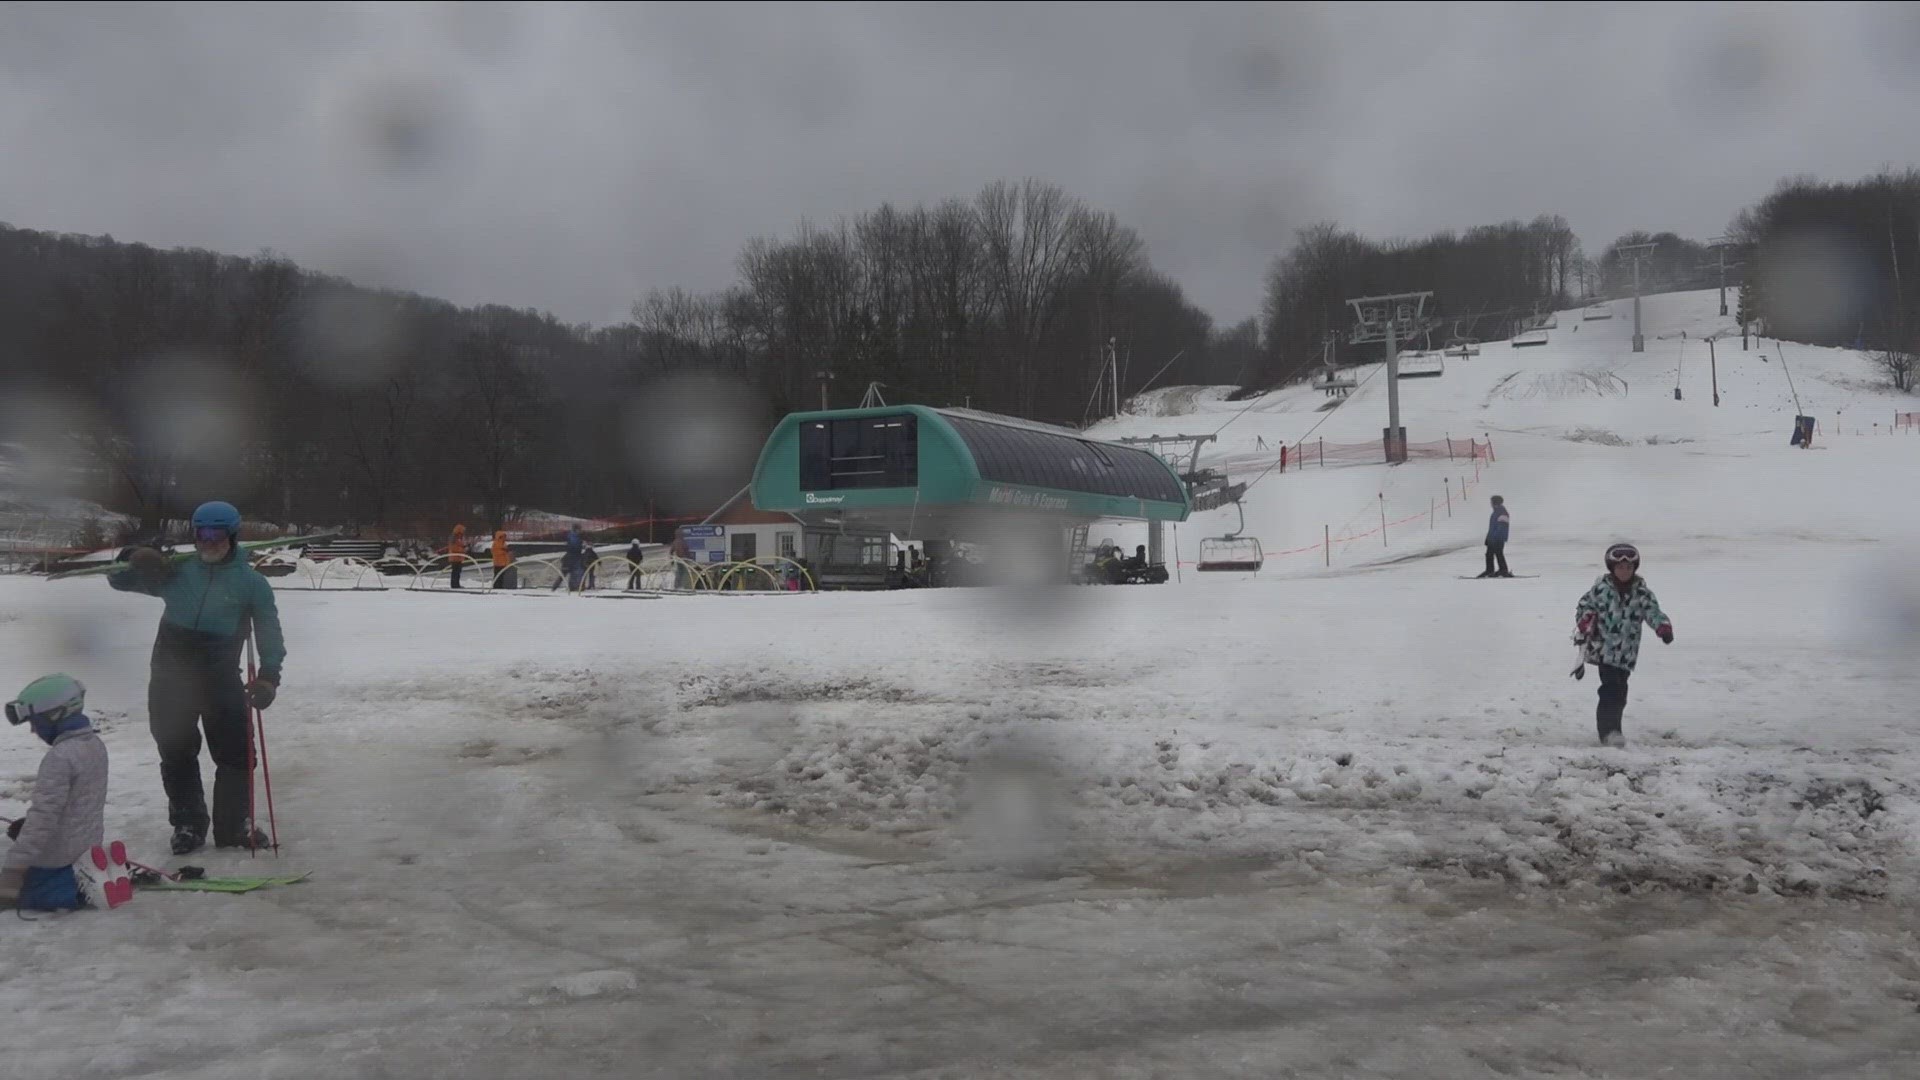 Skiers flocked to ski lifts at Holiday Valley to shred the slopes on opening day.